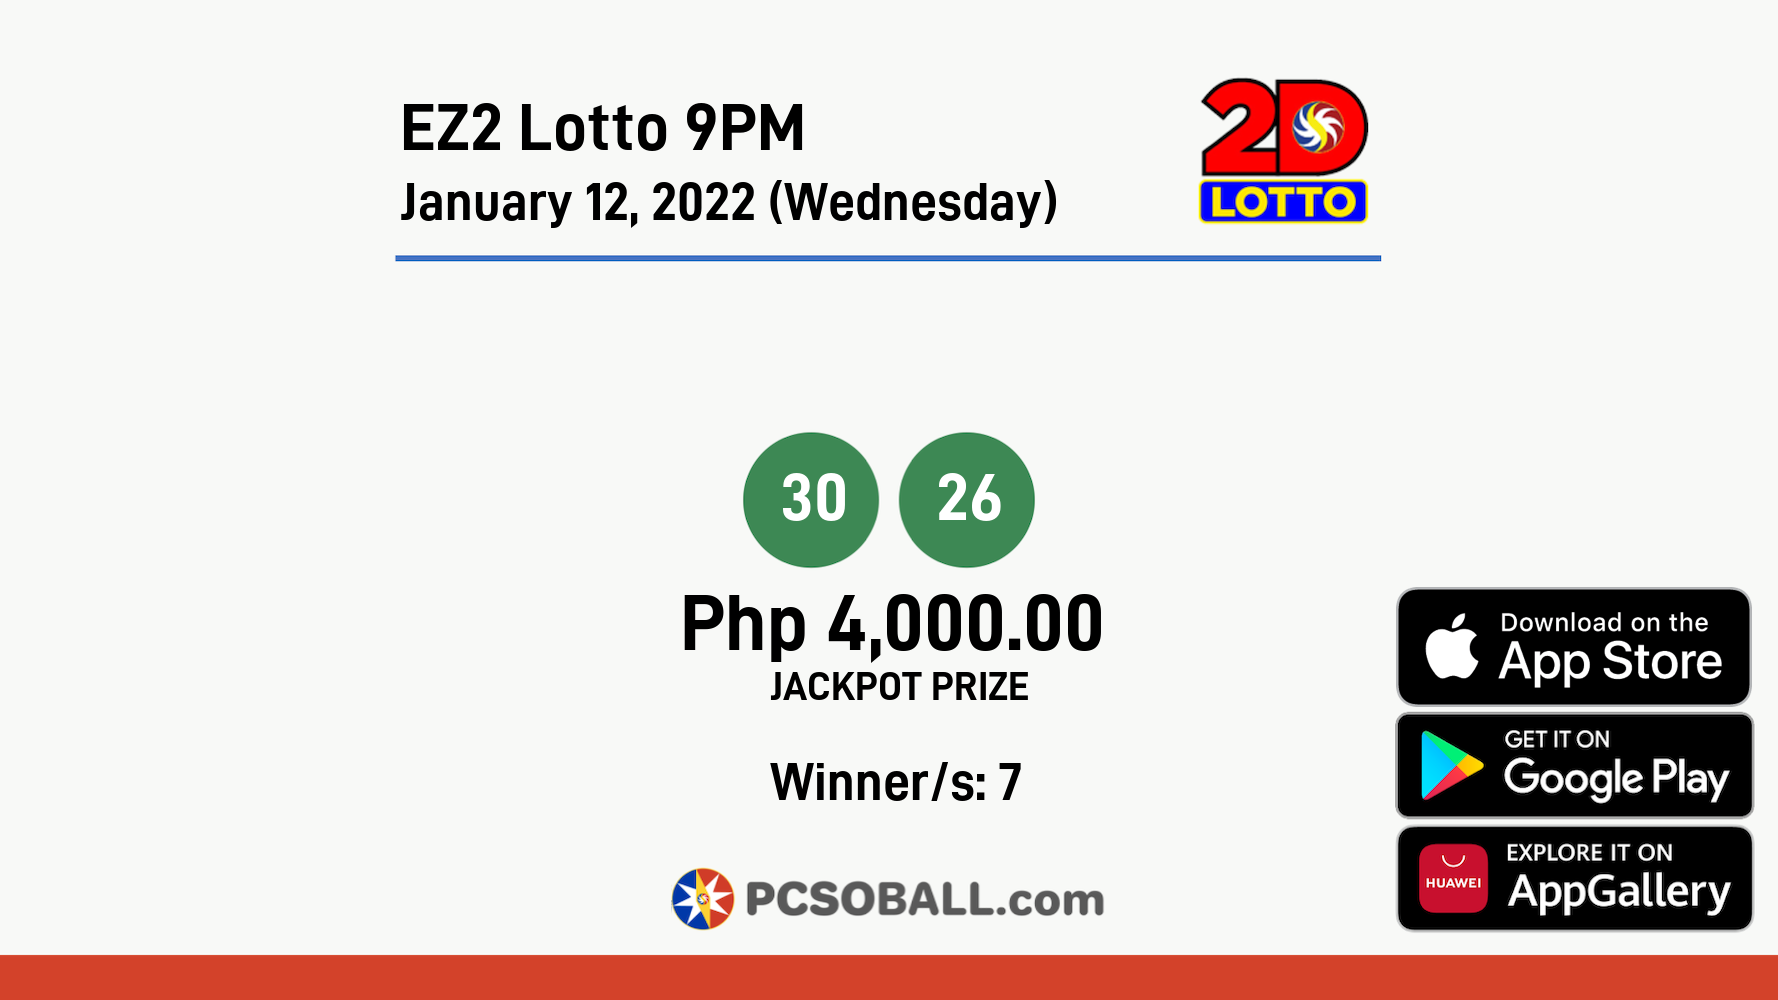 EZ2 Lotto 9PM January 12, 2022 (Wednesday) Result